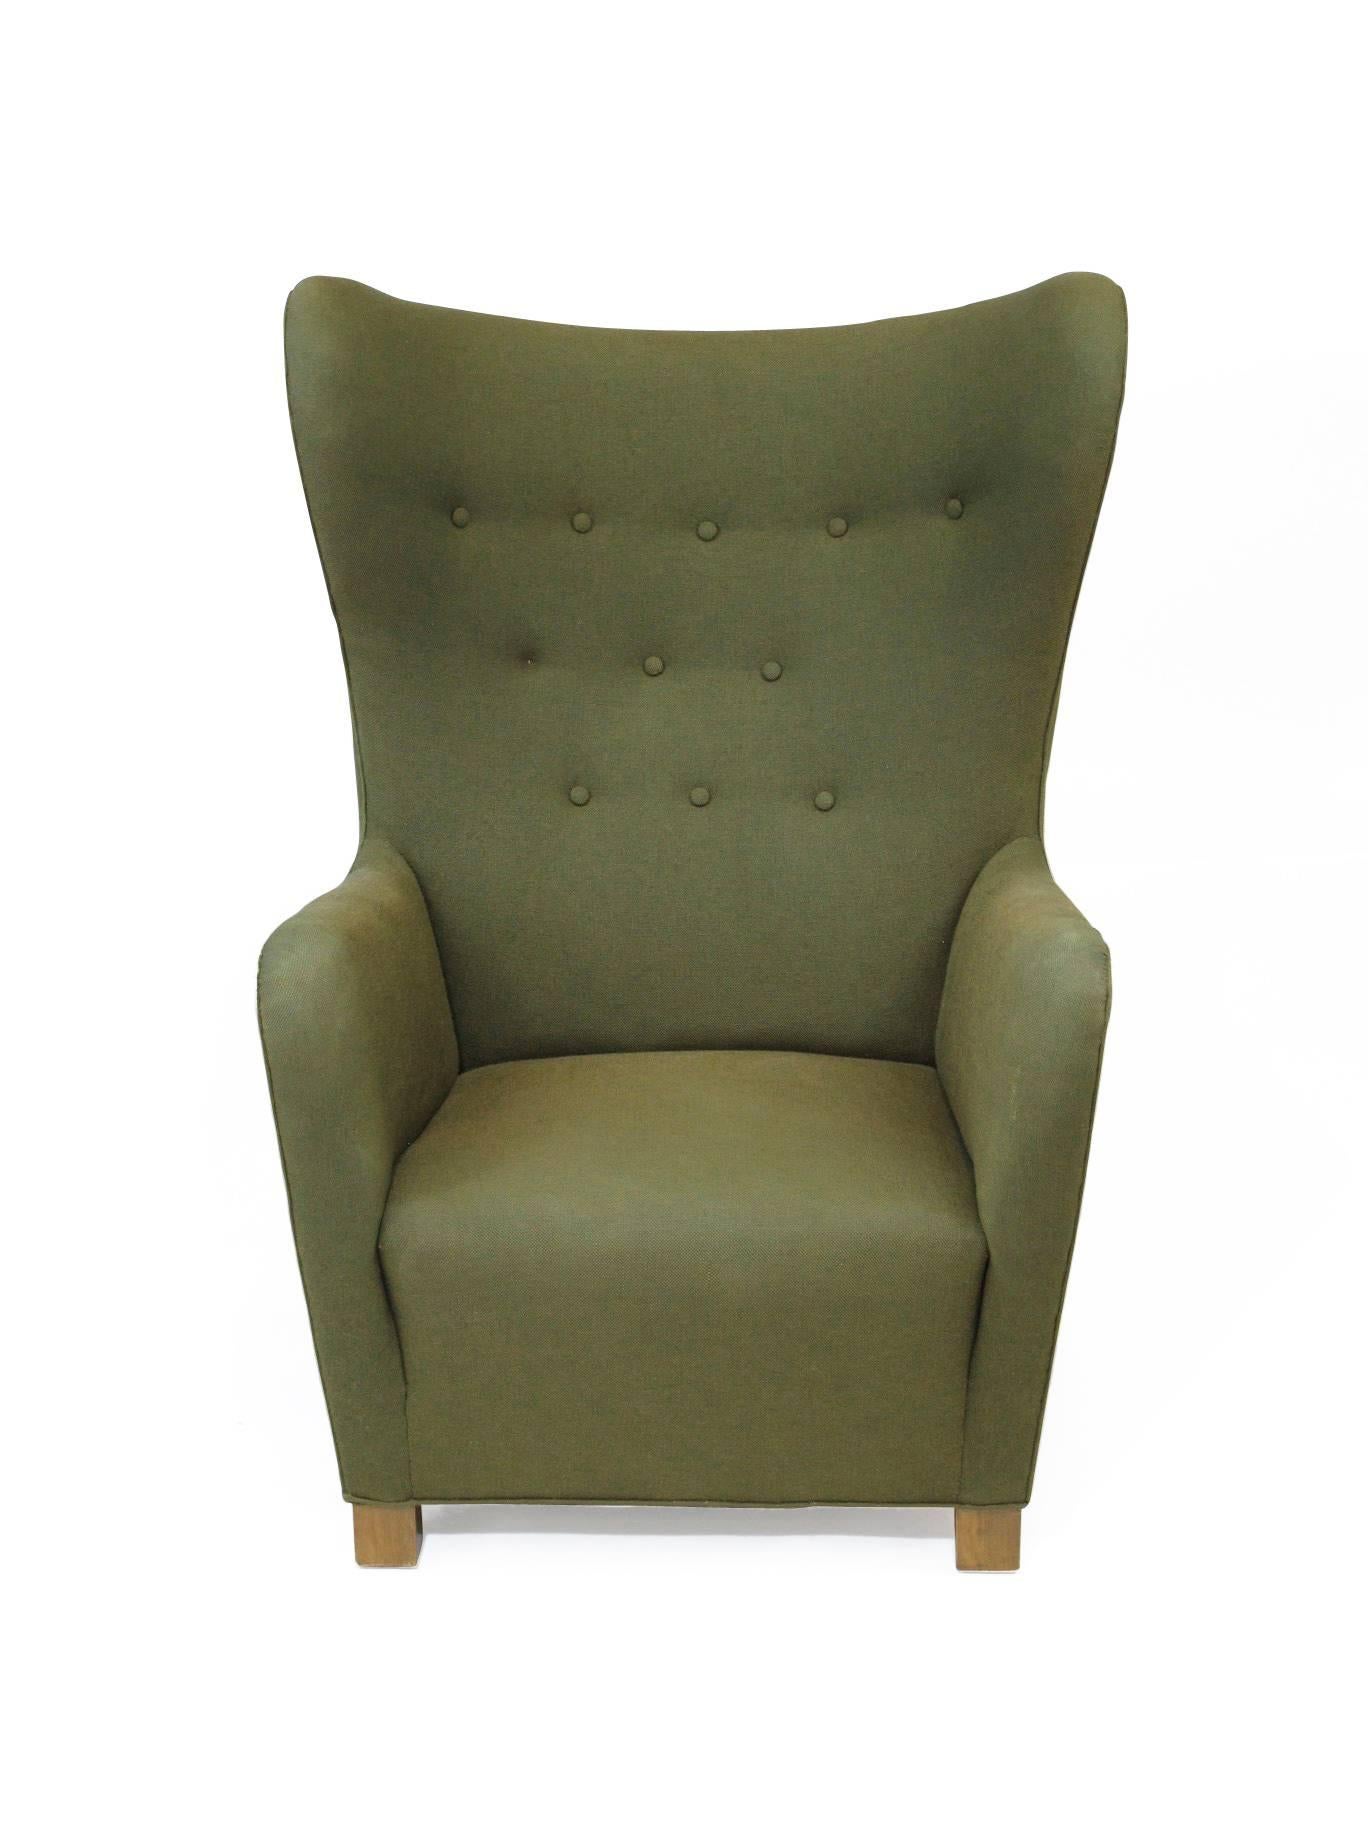 Mid-20th Century 1942 Fritz Hansen Model 1672 Wing Back Chair in the Original Green Wool Fabric